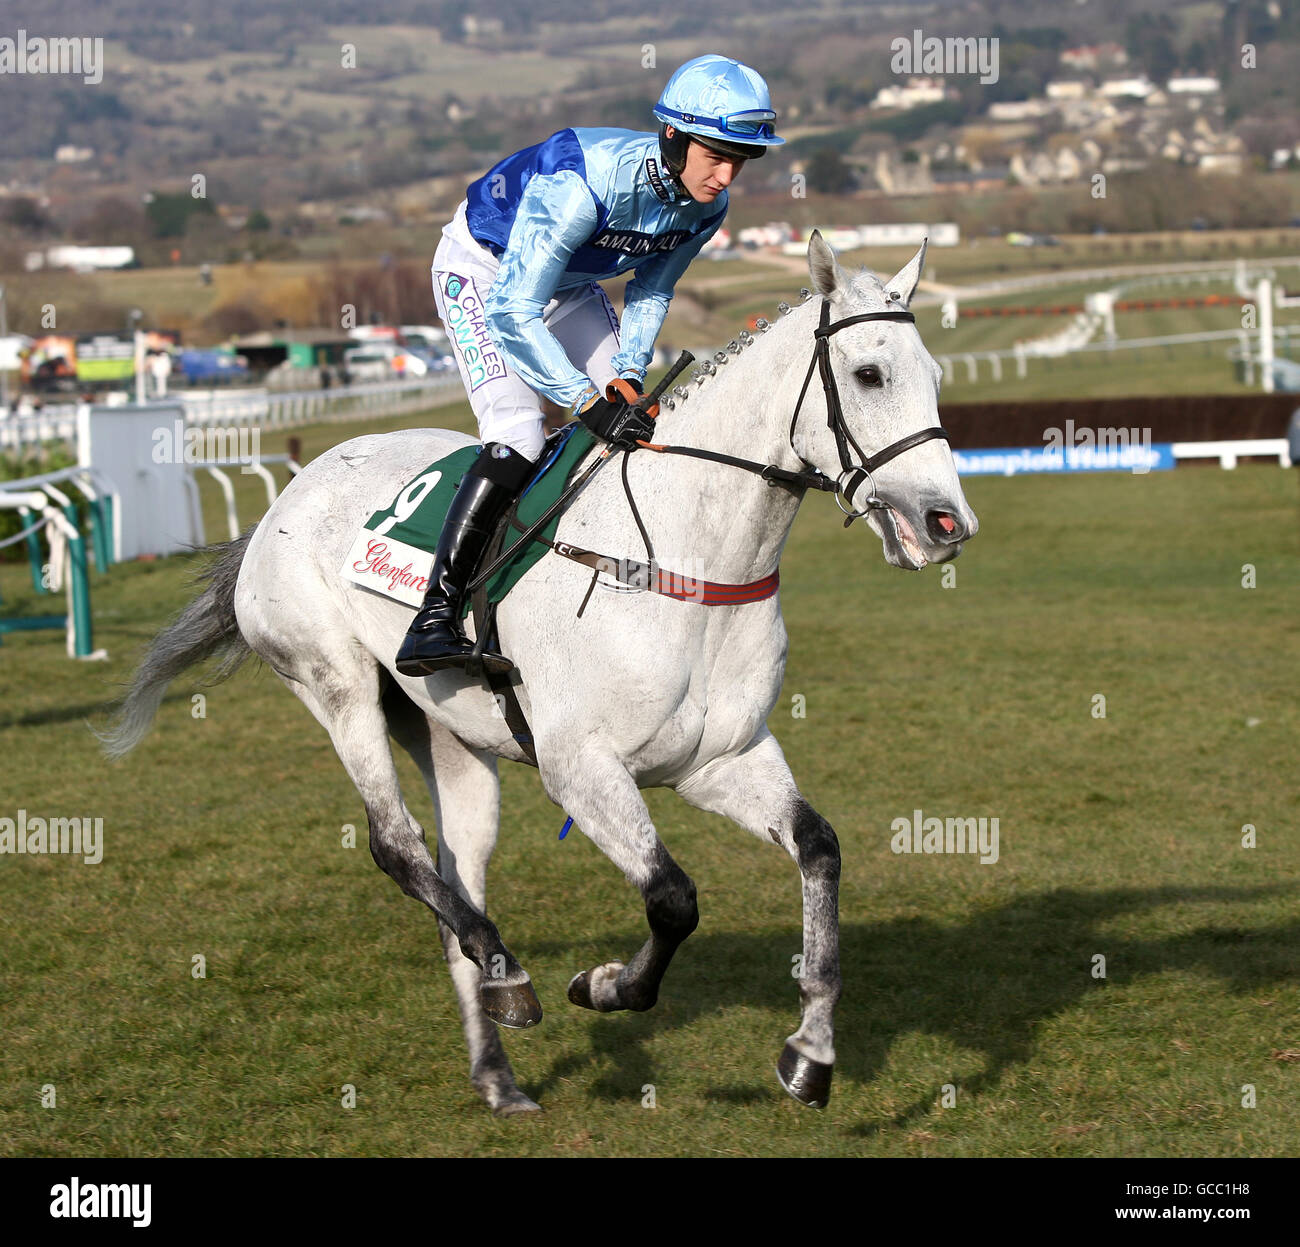 Horse Racing - 2010 Cheltenham Festival - Day One. Lacdoudal ridden by Rhys Flint goes to post Stock Photo